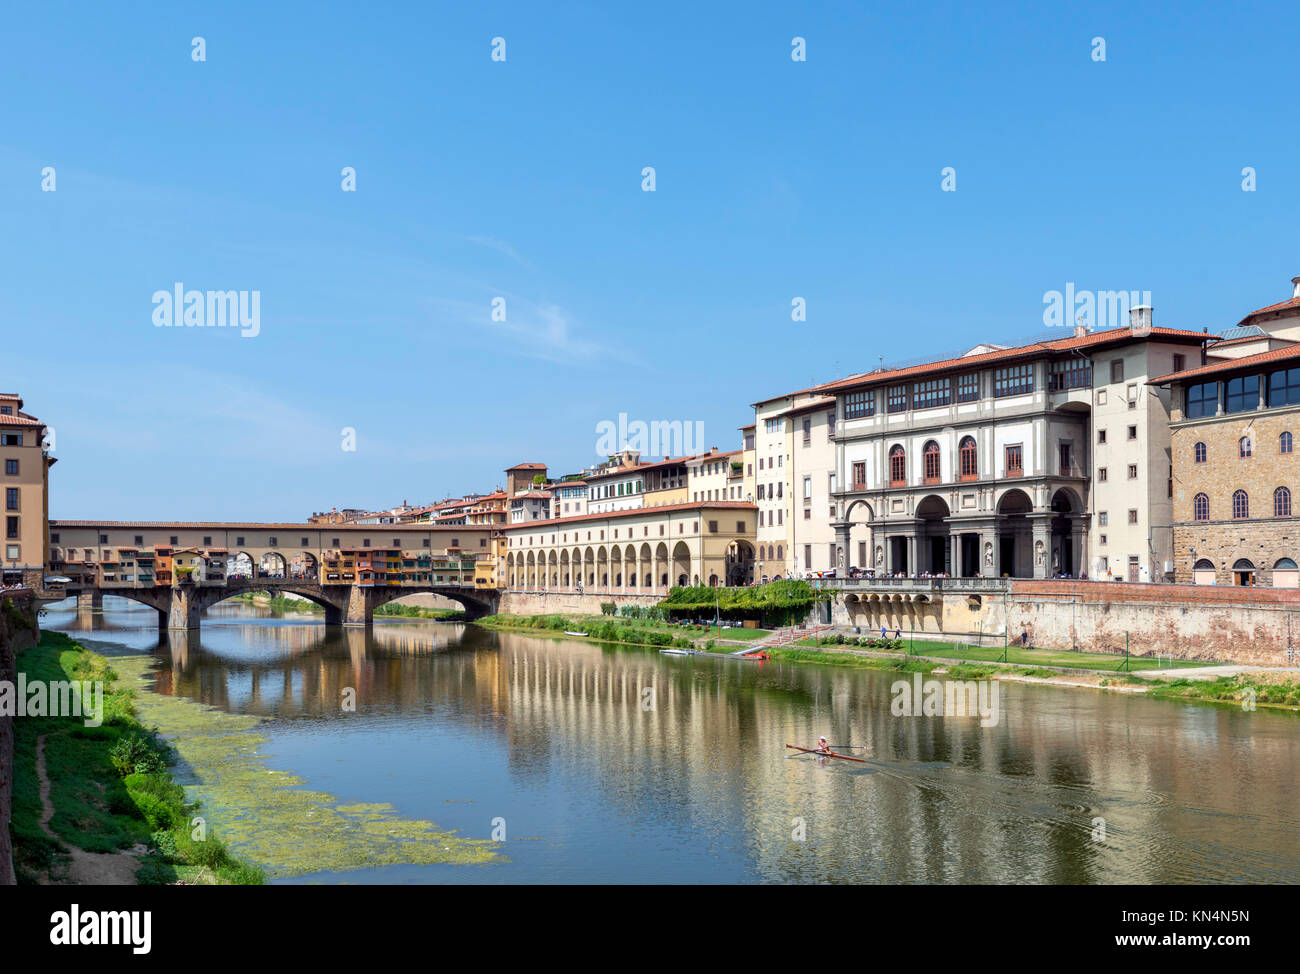 View of the Ponte Vecchio and Uffizi Gallery from across the River Arno, Florence, Italy. Stock Photo